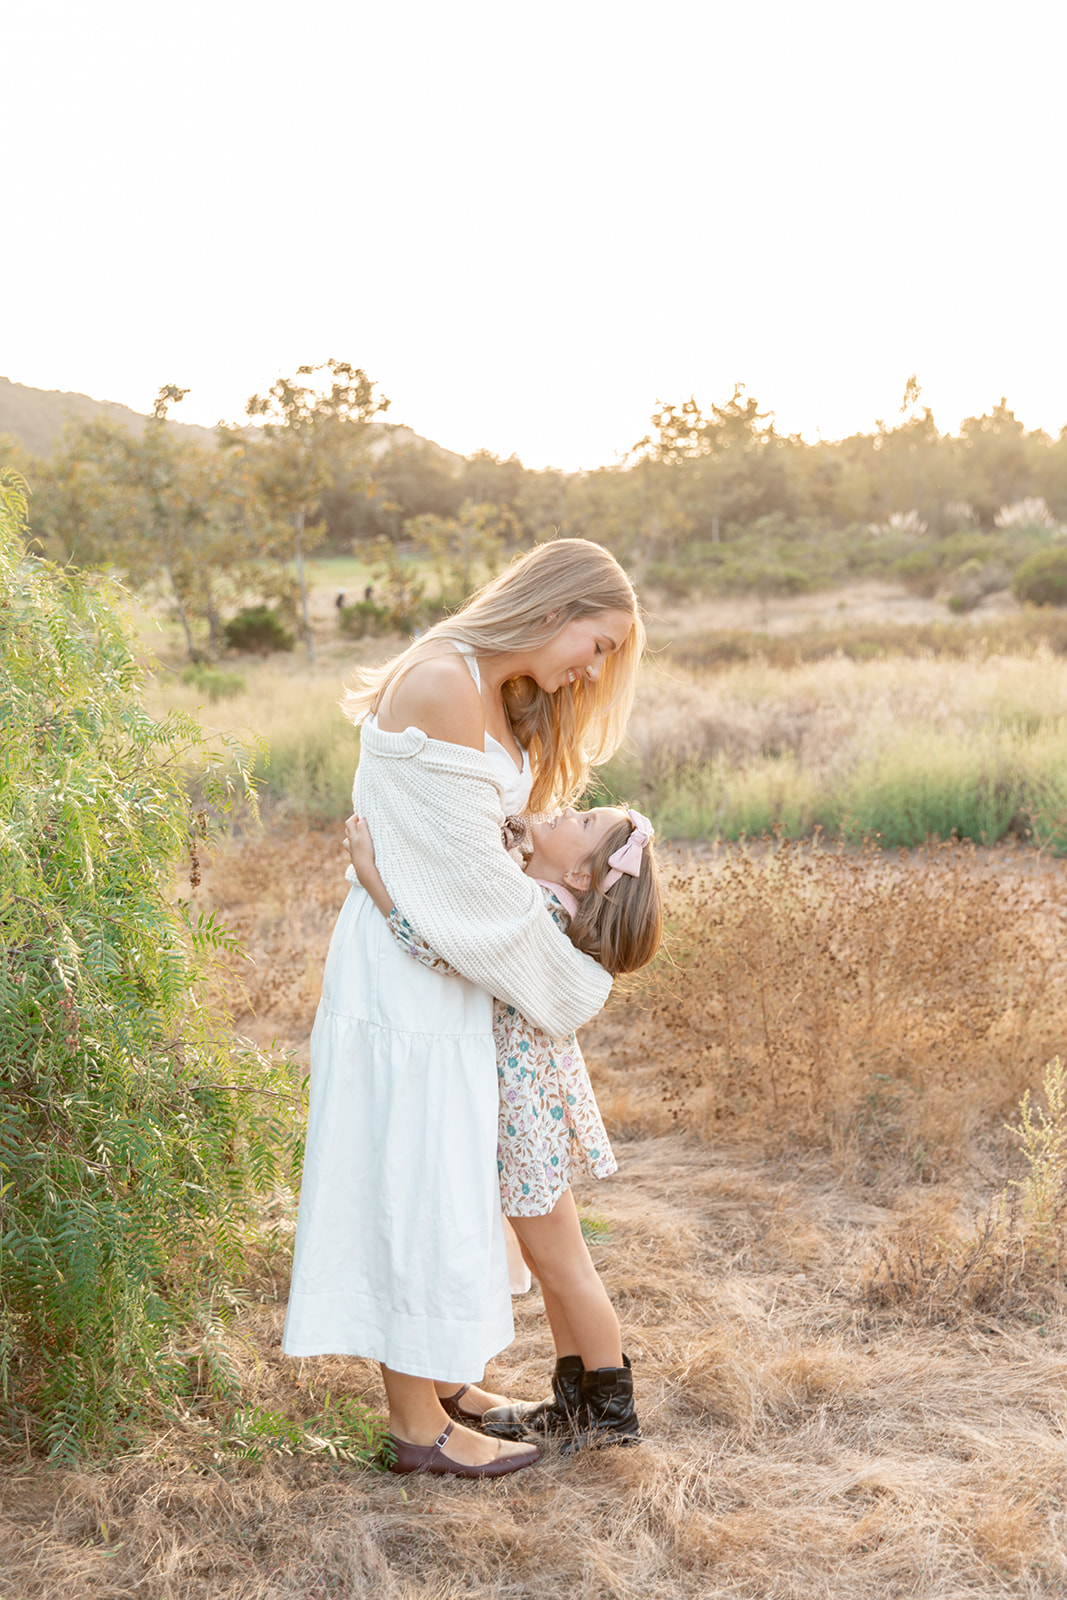 A mom and daughter hug while standing in a field at sunset